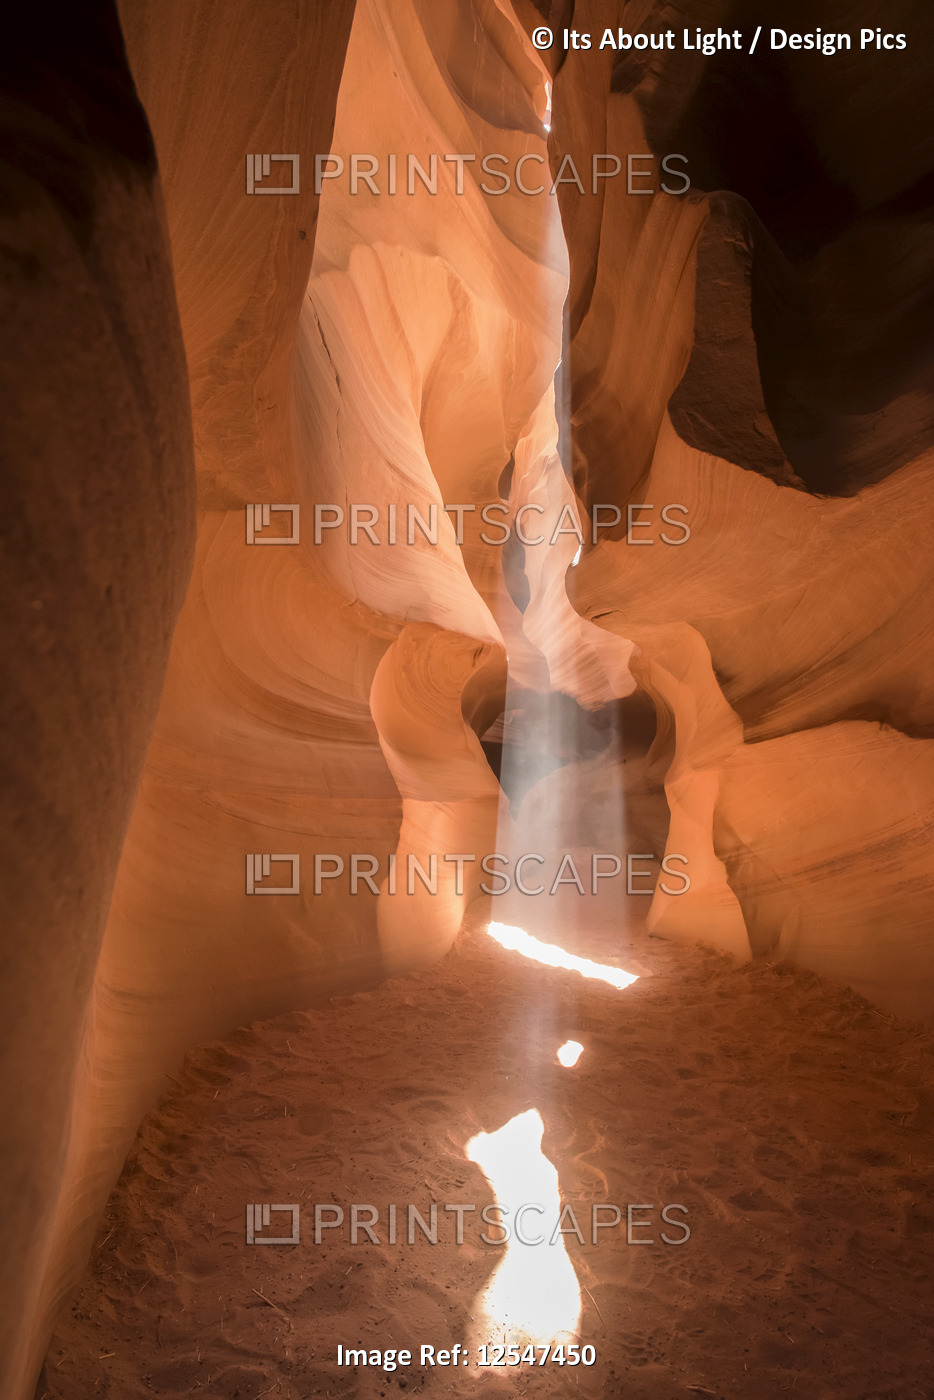 Sunlight streams through a natural hole in the sandstone to the sand below, ...